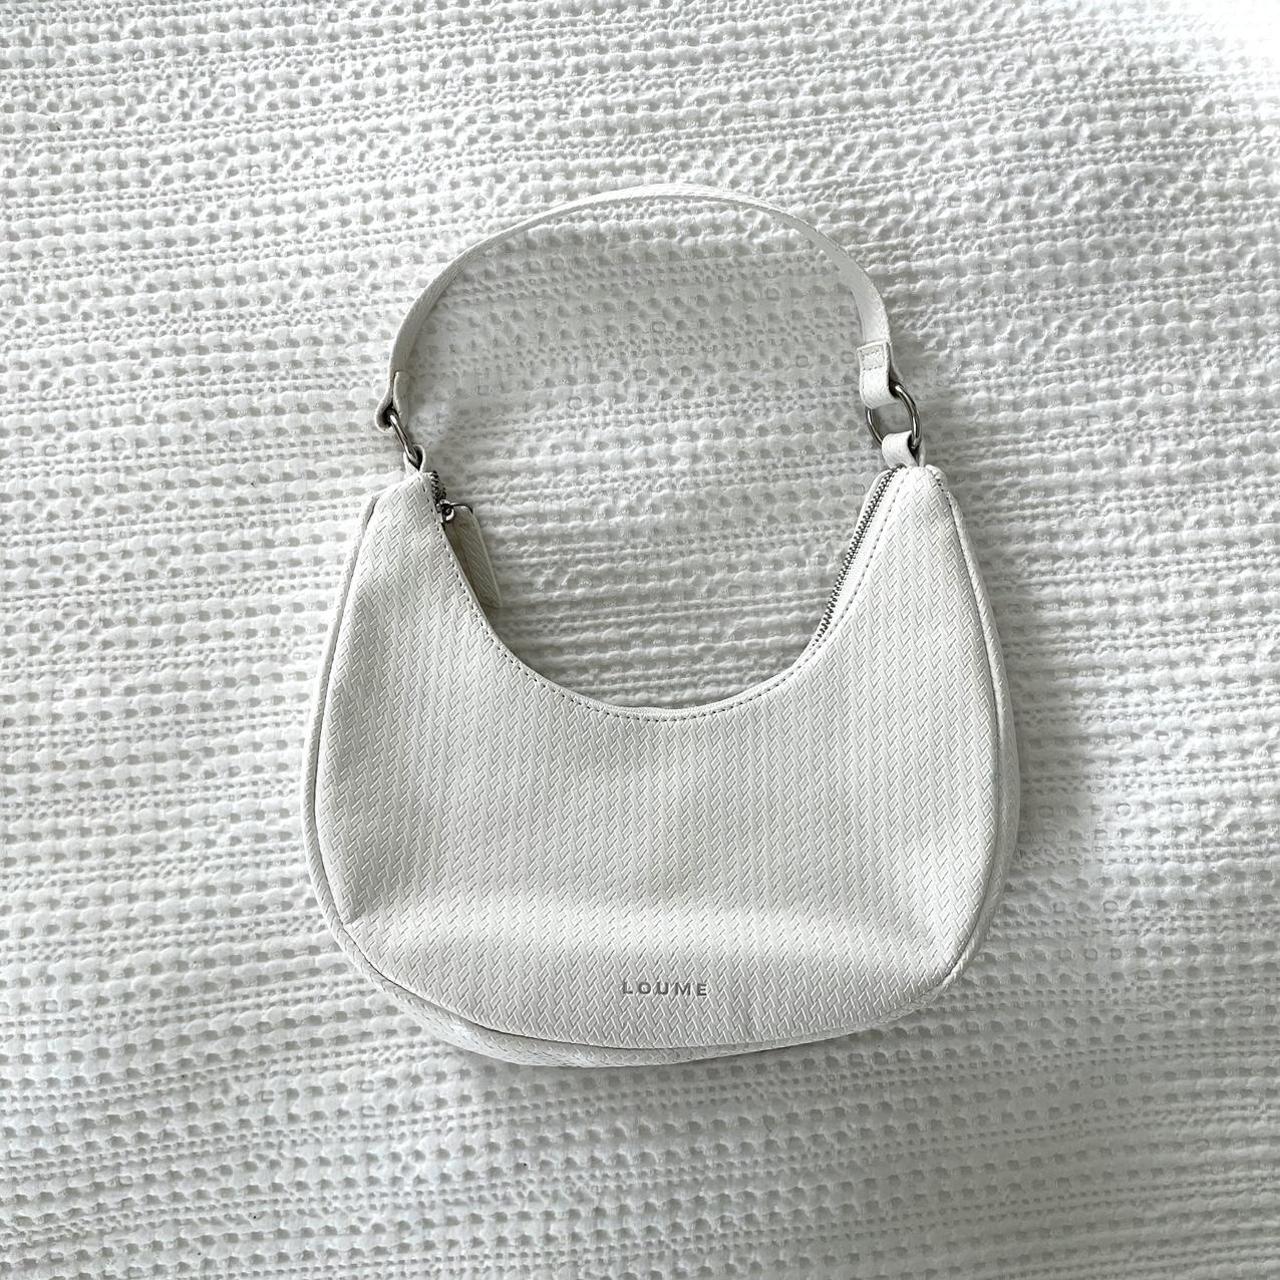 Shein clear , perspective hand bag . Shein official - Depop